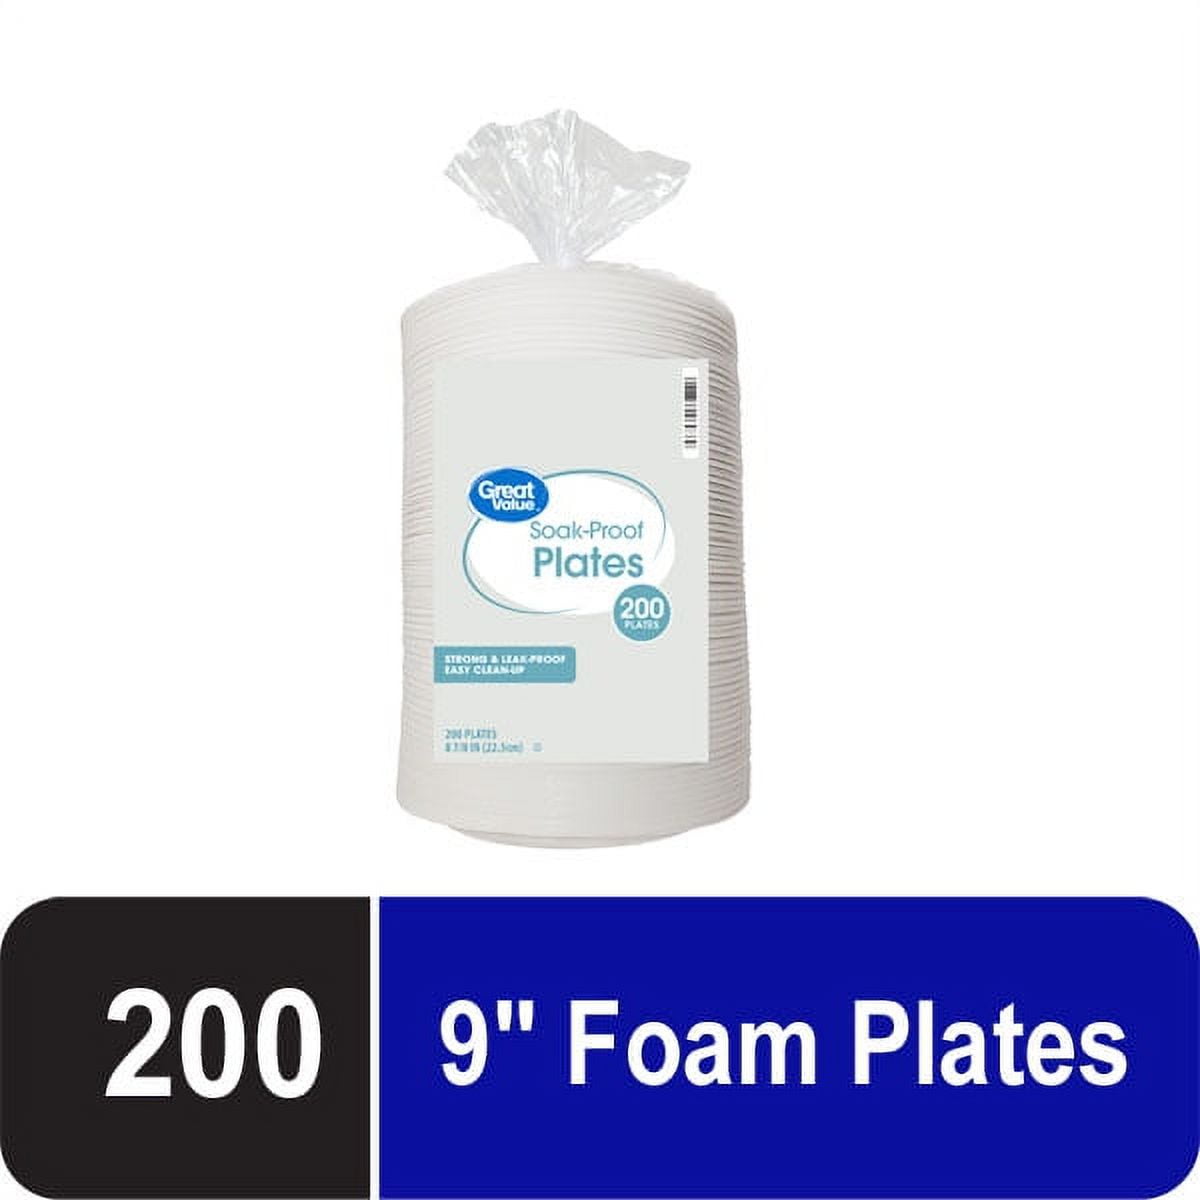 Hefty Everyday Plates, Soak Proof, 10.25 Inches - 25 plates